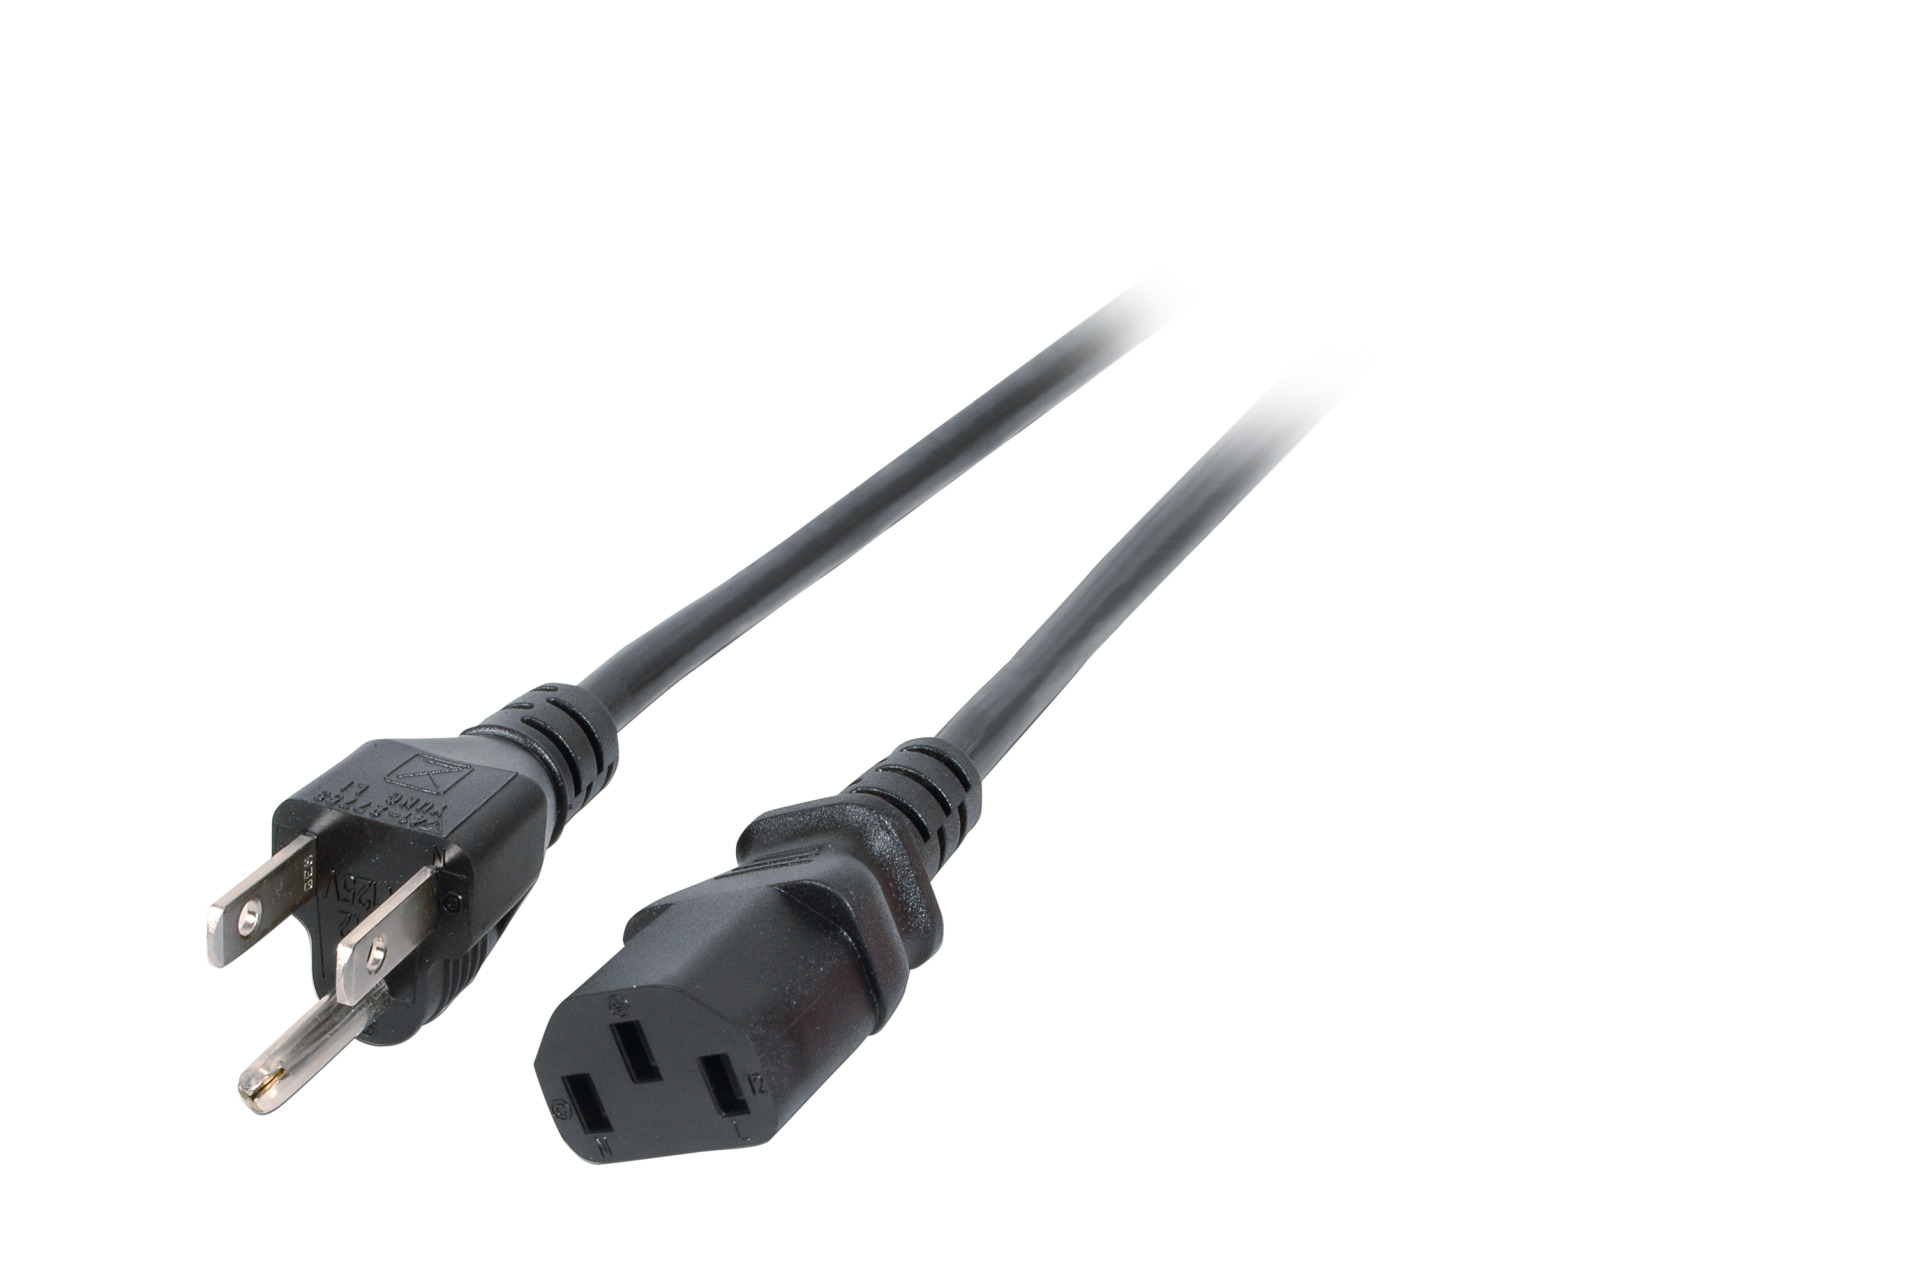 Power Cable Japan Type B - C13 180°, Black, 1.8 m, VCTF 3 x 0.75 mm²